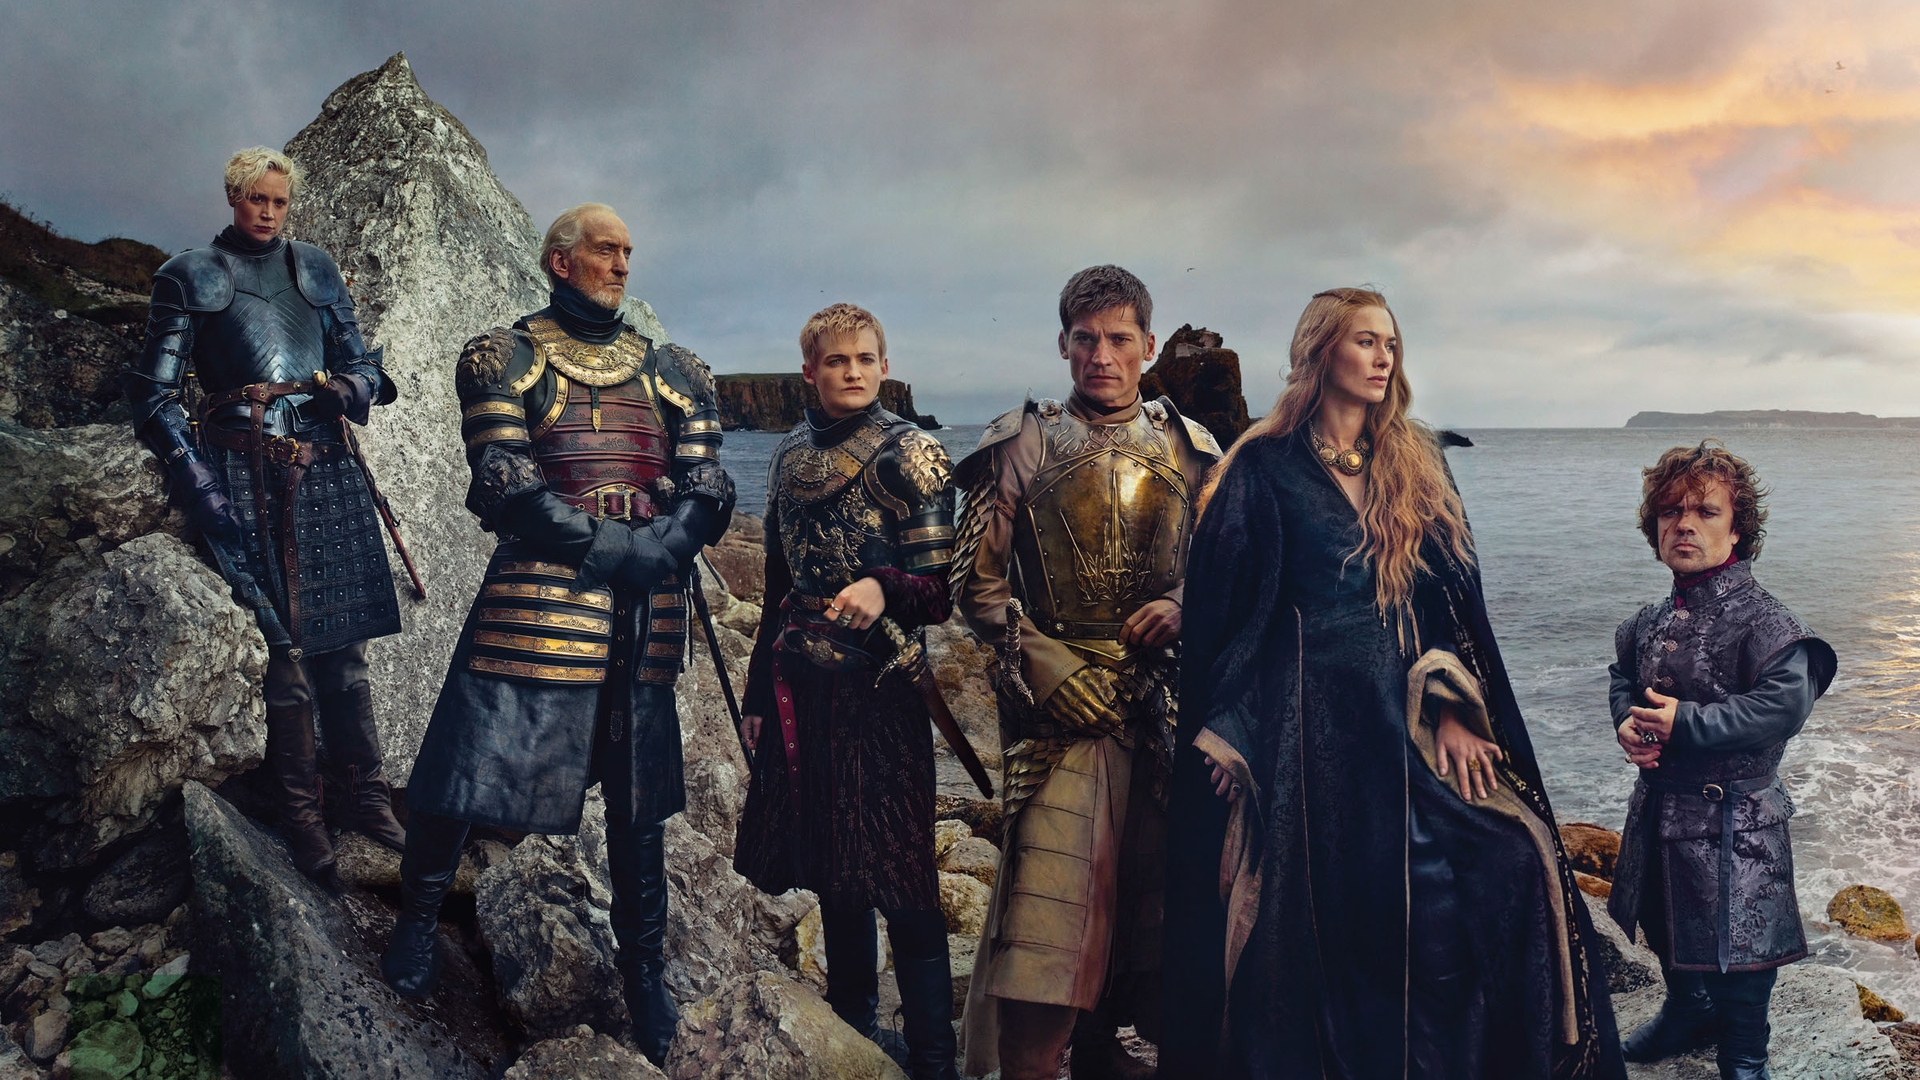 Game of Thrones Characters for 1920 x 1080 HDTV 1080p resolution